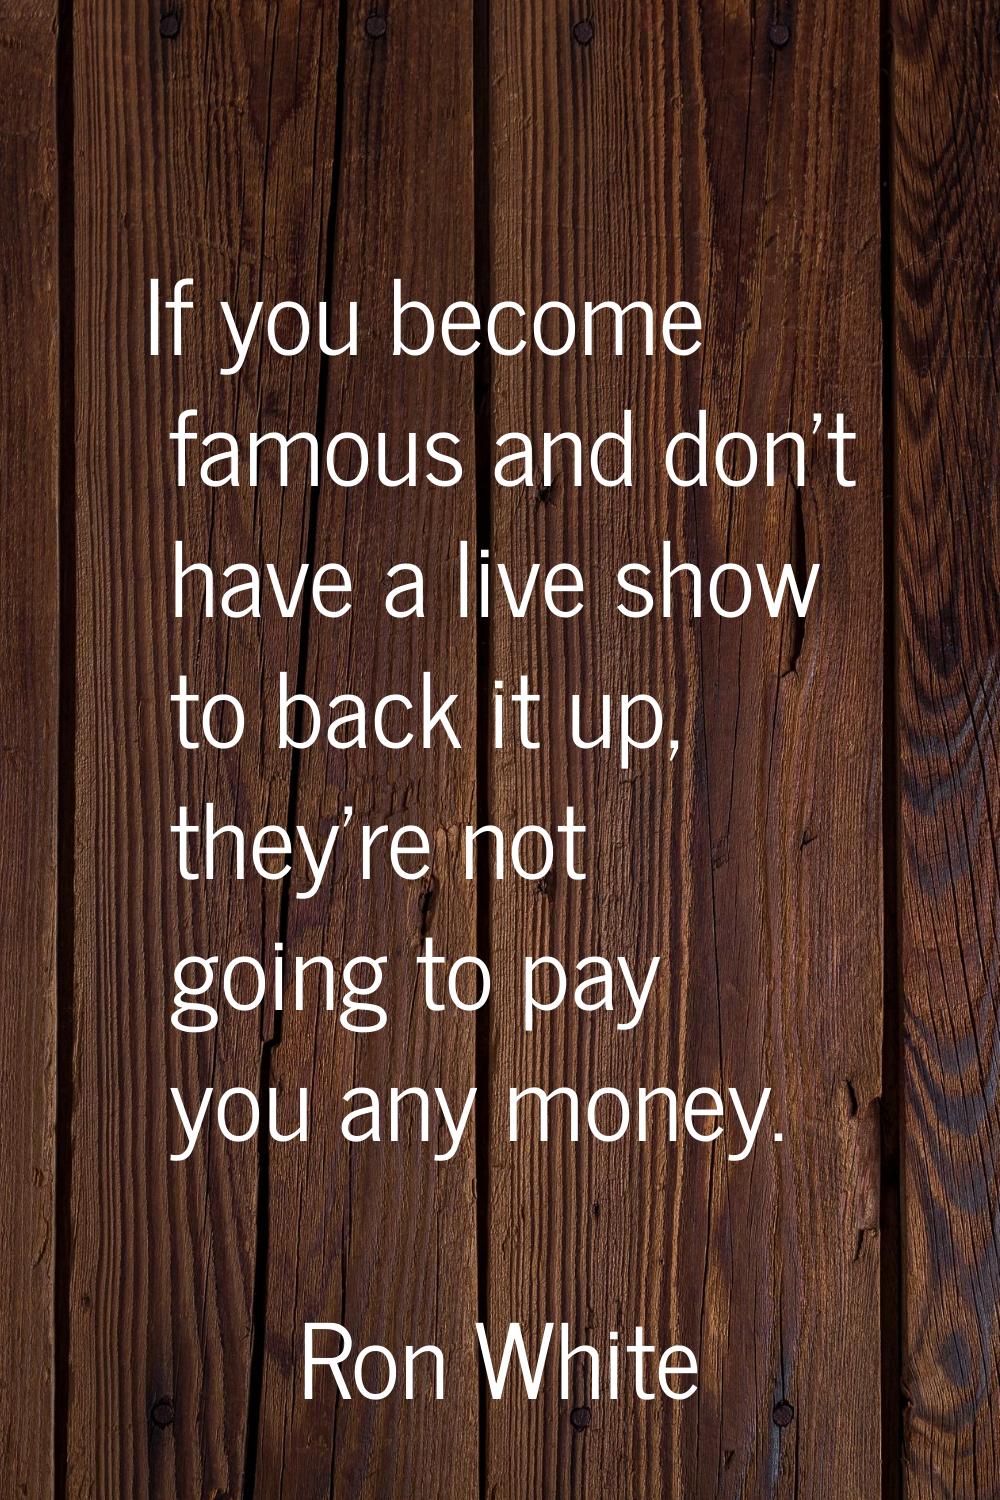 If you become famous and don't have a live show to back it up, they're not going to pay you any mon